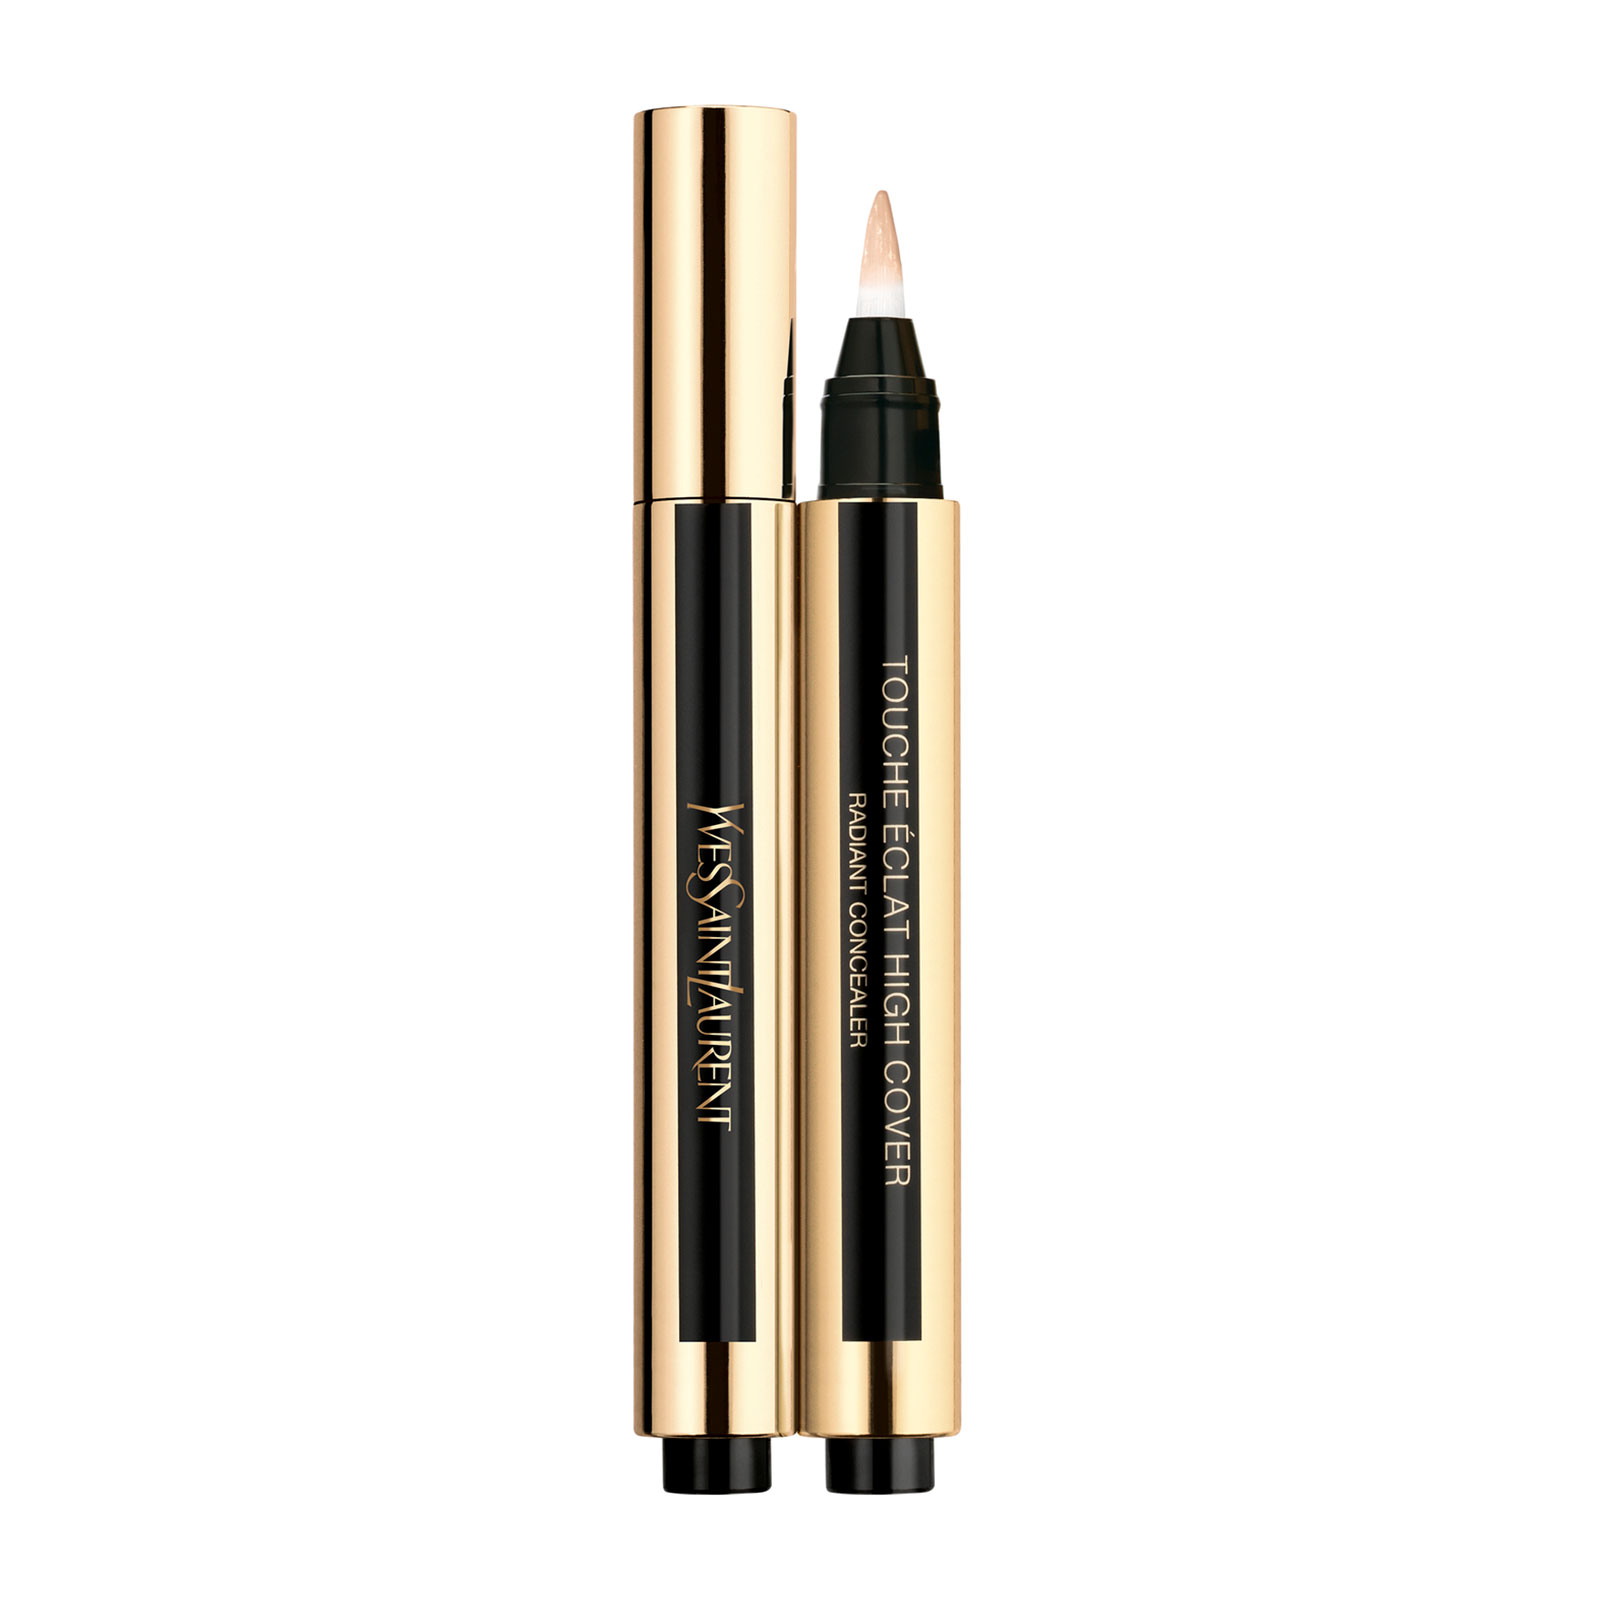 Ysl Beauty Touche Eclat High Cover Concealer 2.5Ml 0.75 Sugar